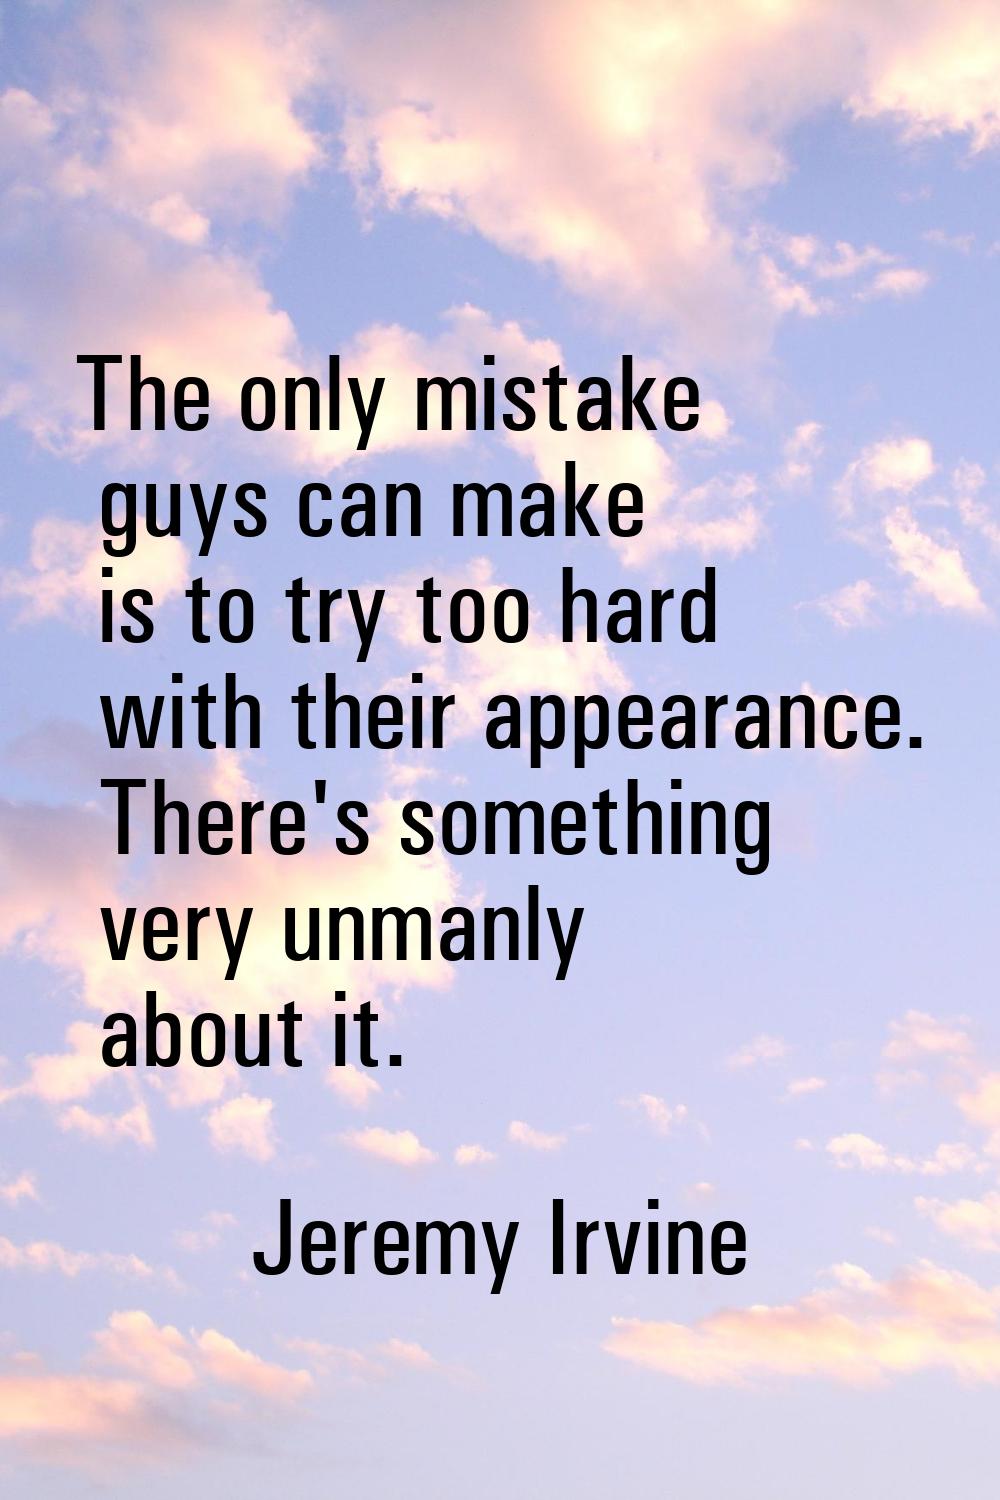 The only mistake guys can make is to try too hard with their appearance. There's something very unm